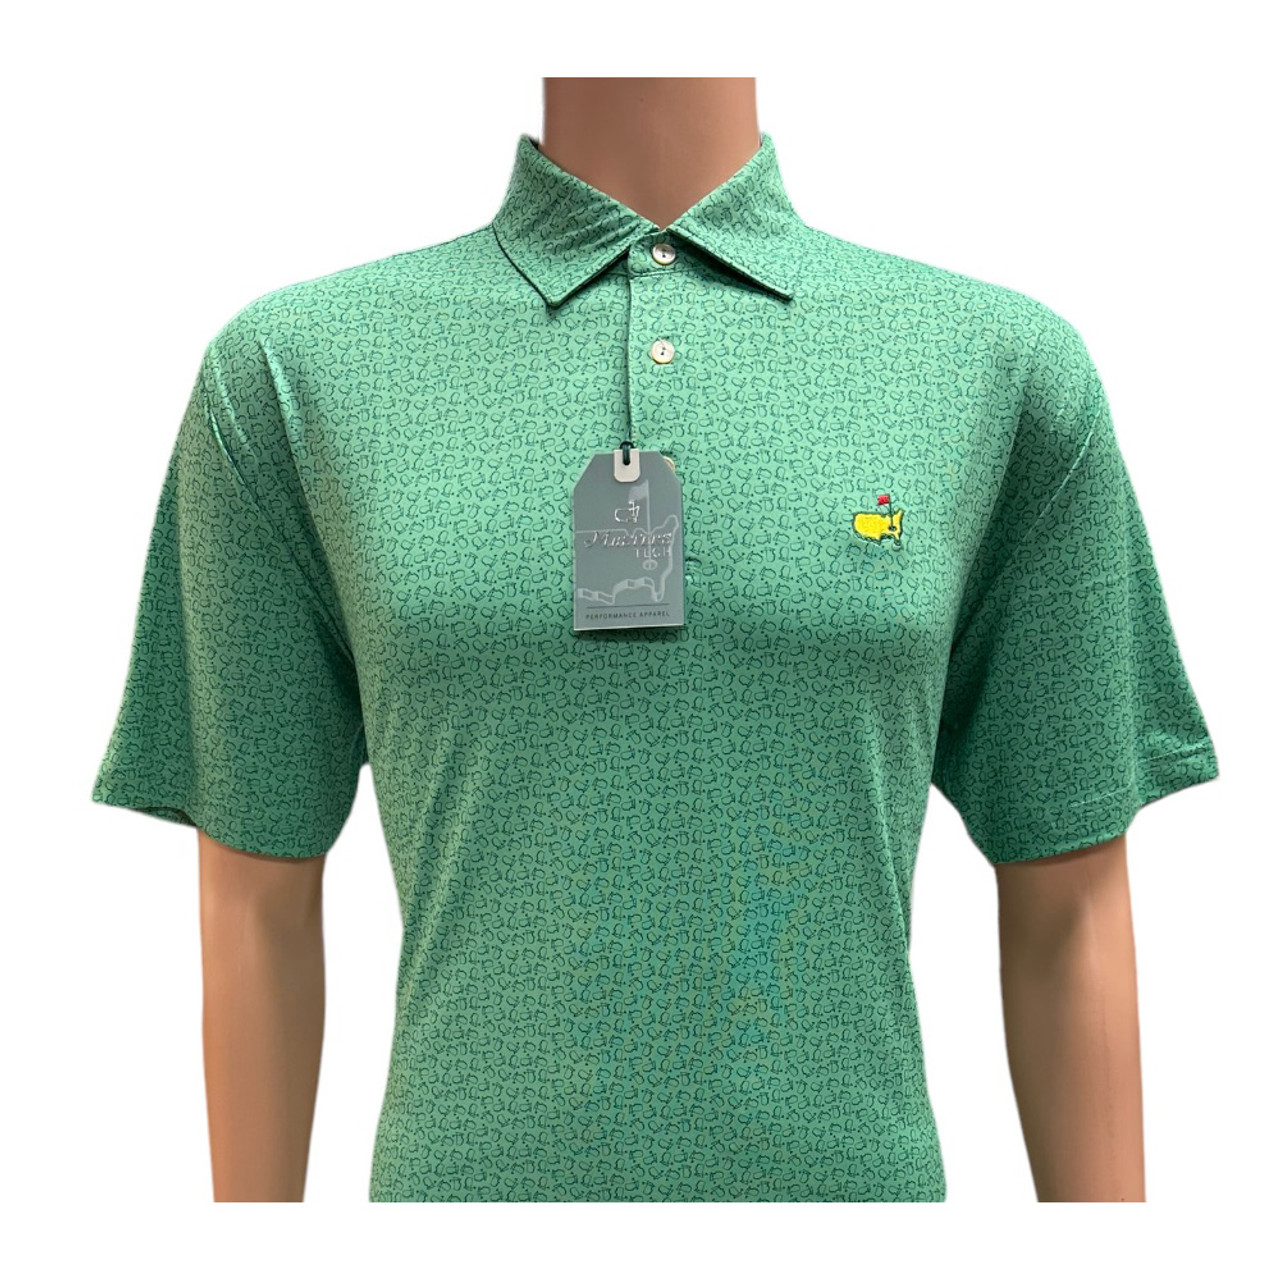 Masters Tech Green Performance Golf Shirt Polo with Dk Green ...